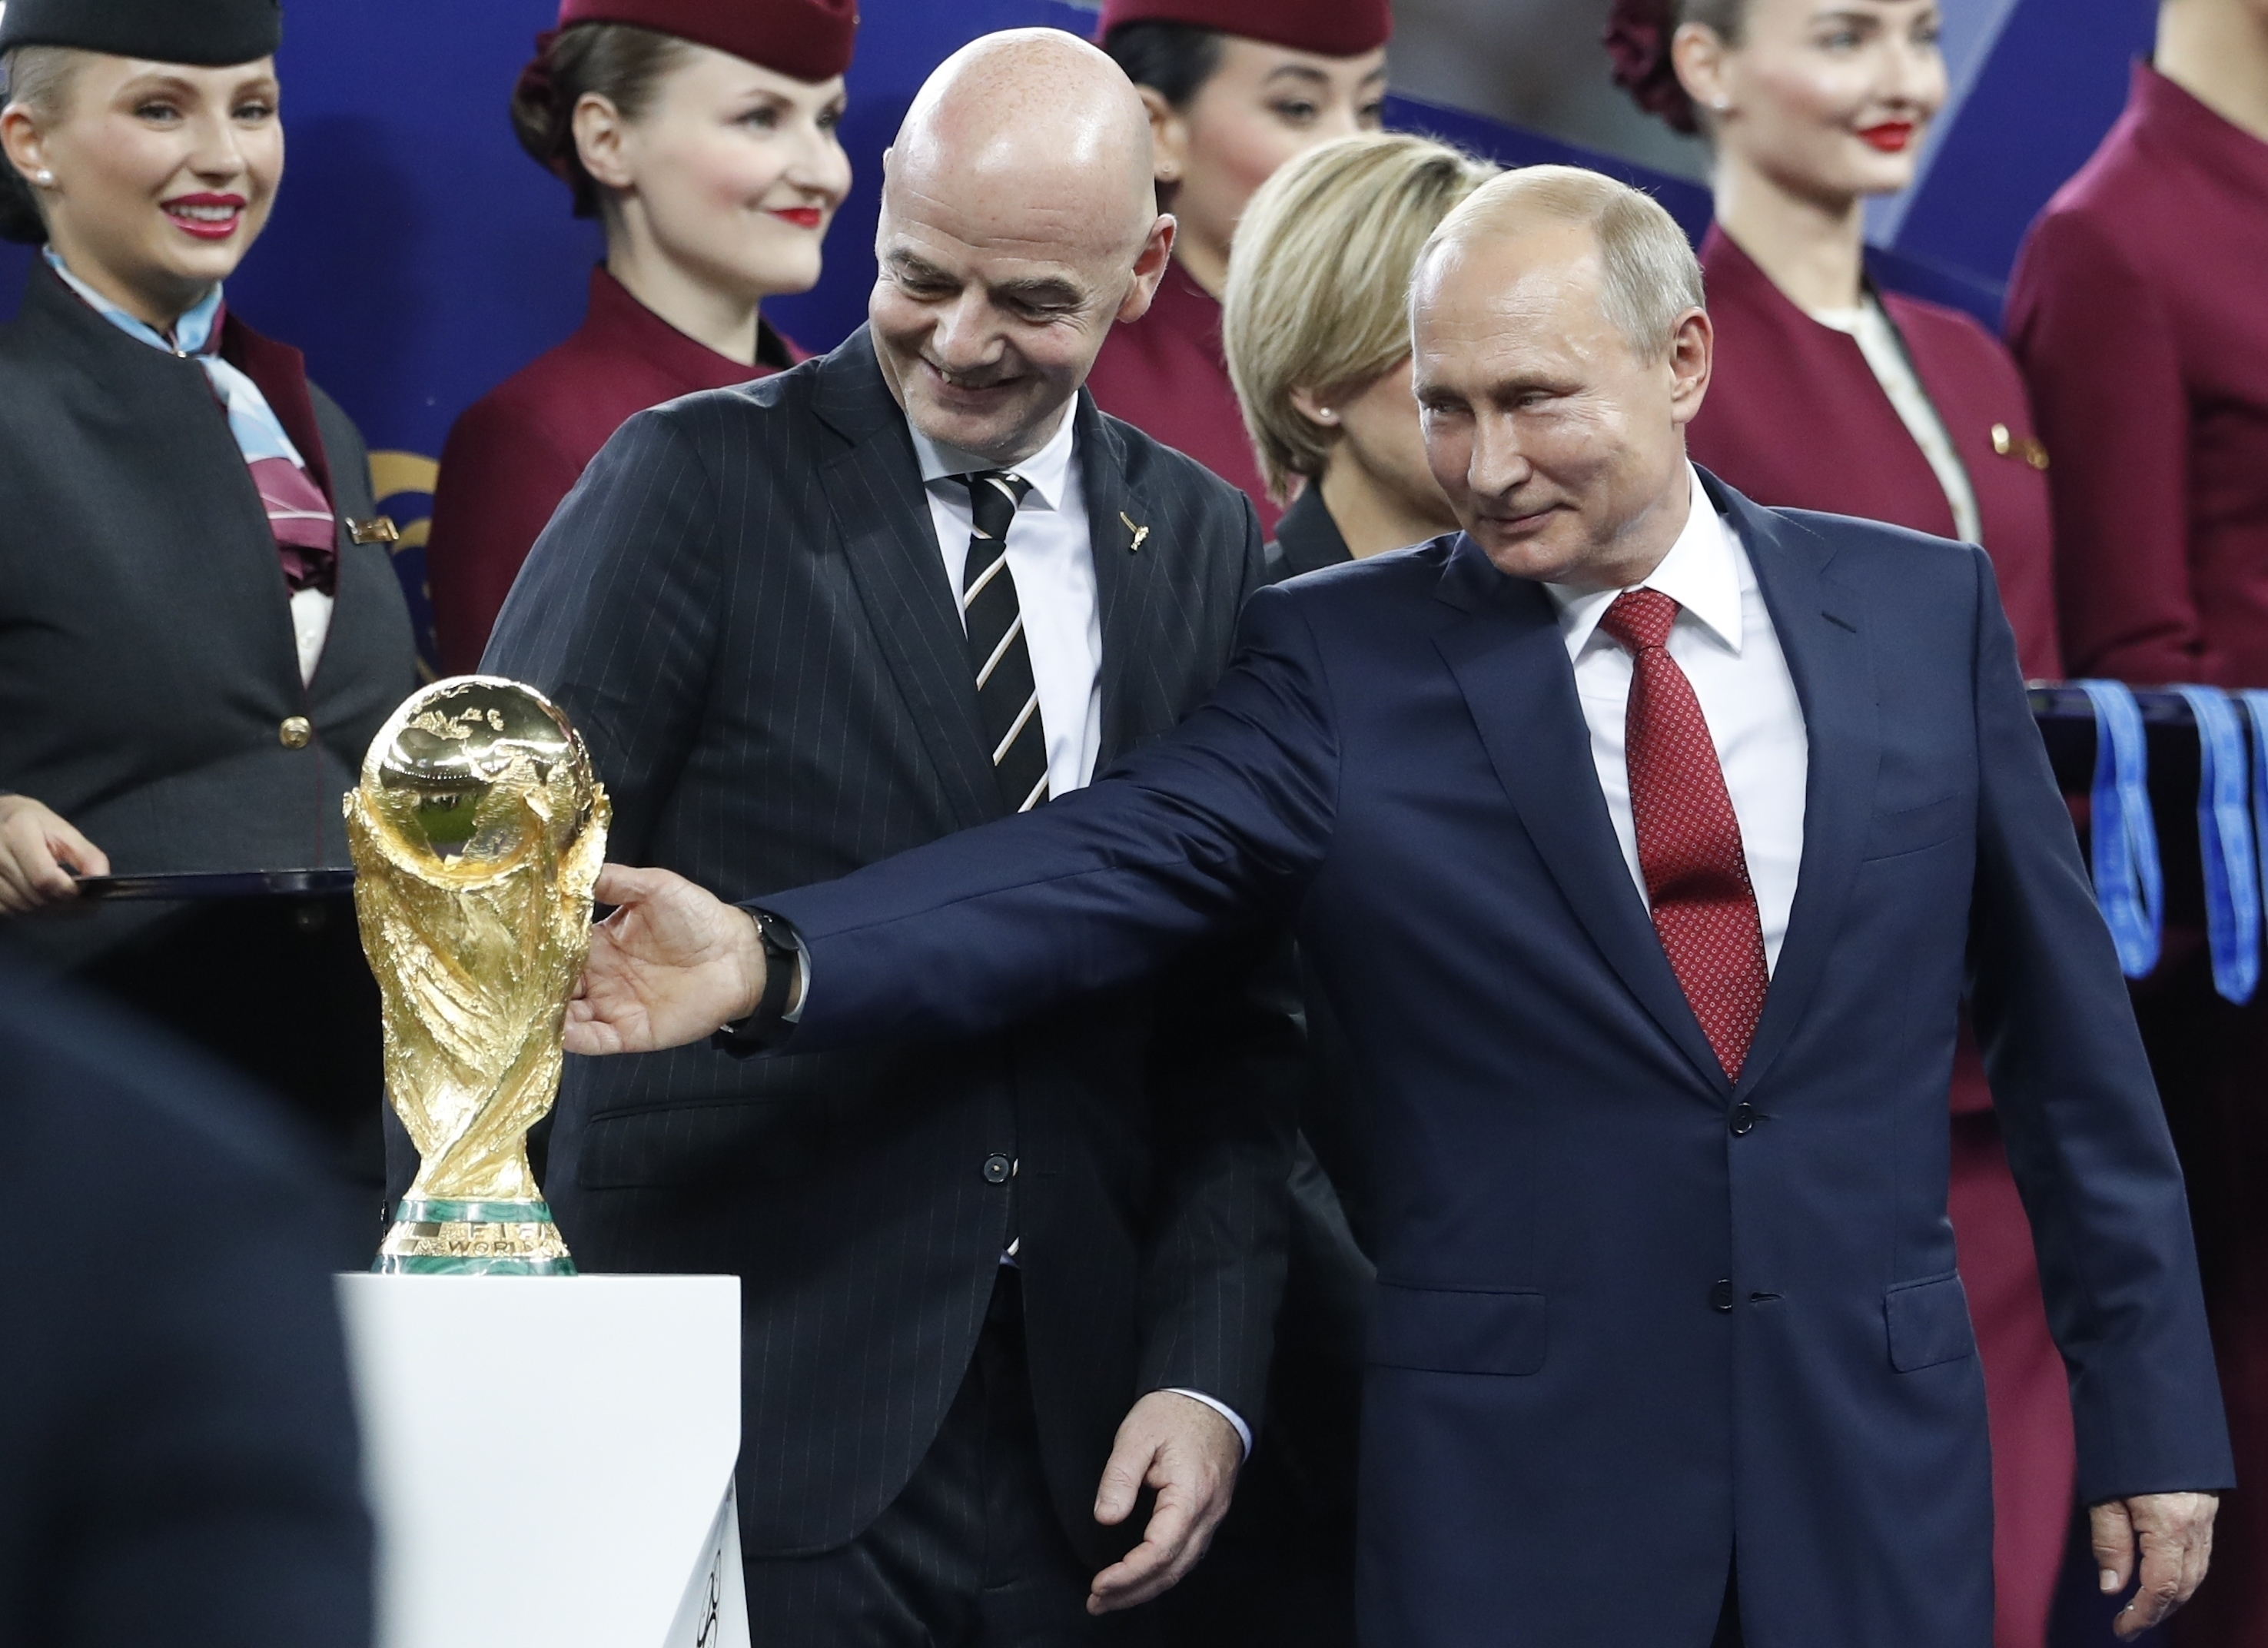 World Cups24 - Qatar World Cup 2022 - Worldwide known fashion company Louis  Vuitton has announced three unique projects to celebrate the upcoming 2018  FIFA World Cup Russia™. The company was commissioned